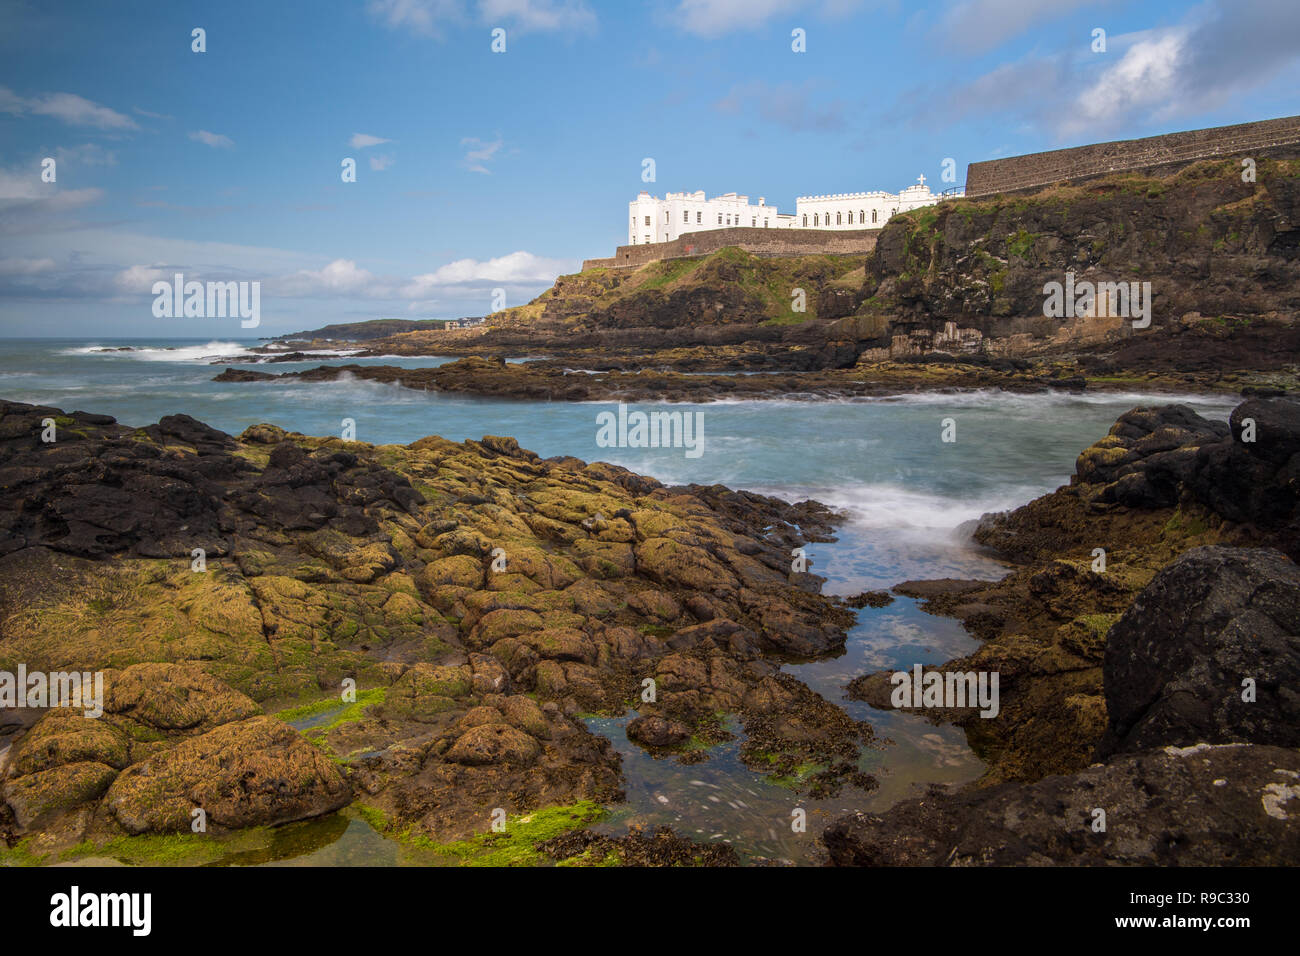 Cliff walk at Port Stewart, Northern Ireland with the Dominican College visible on the clifftop and lichen and seagrass covered rocks in the foreground. Stock Photo